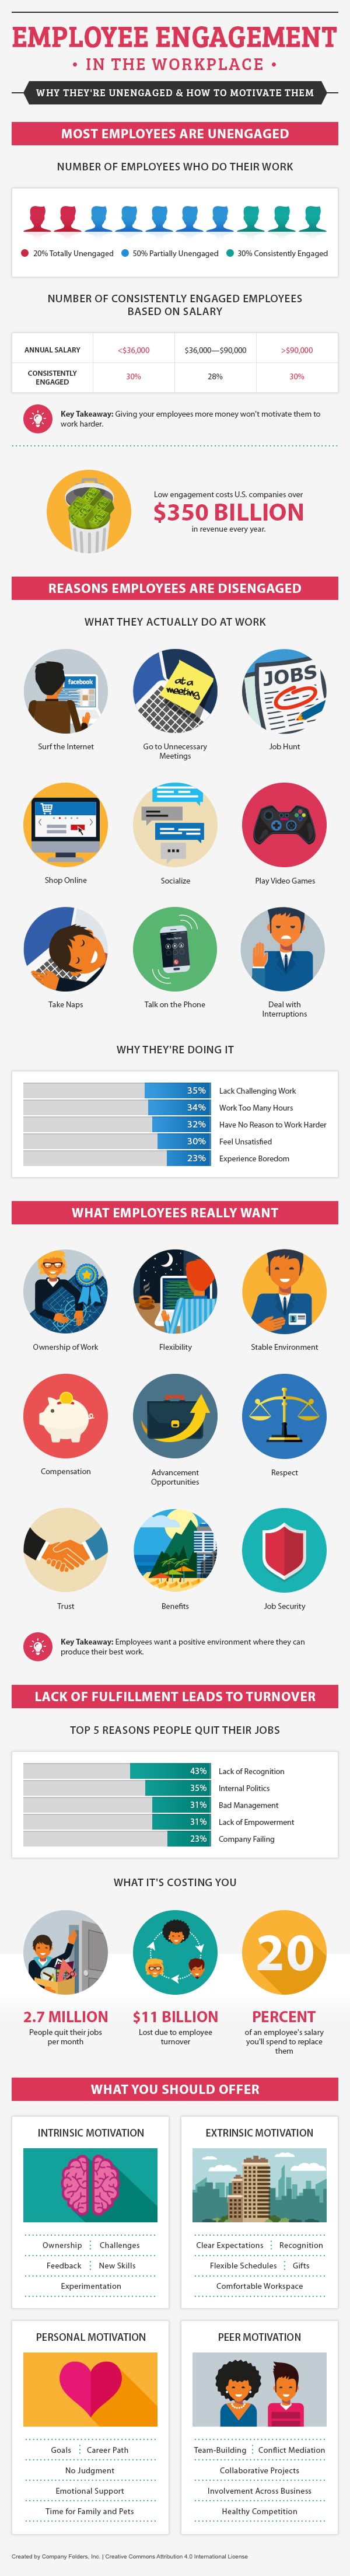 Motivate Your Employees in 4 Easy Steps